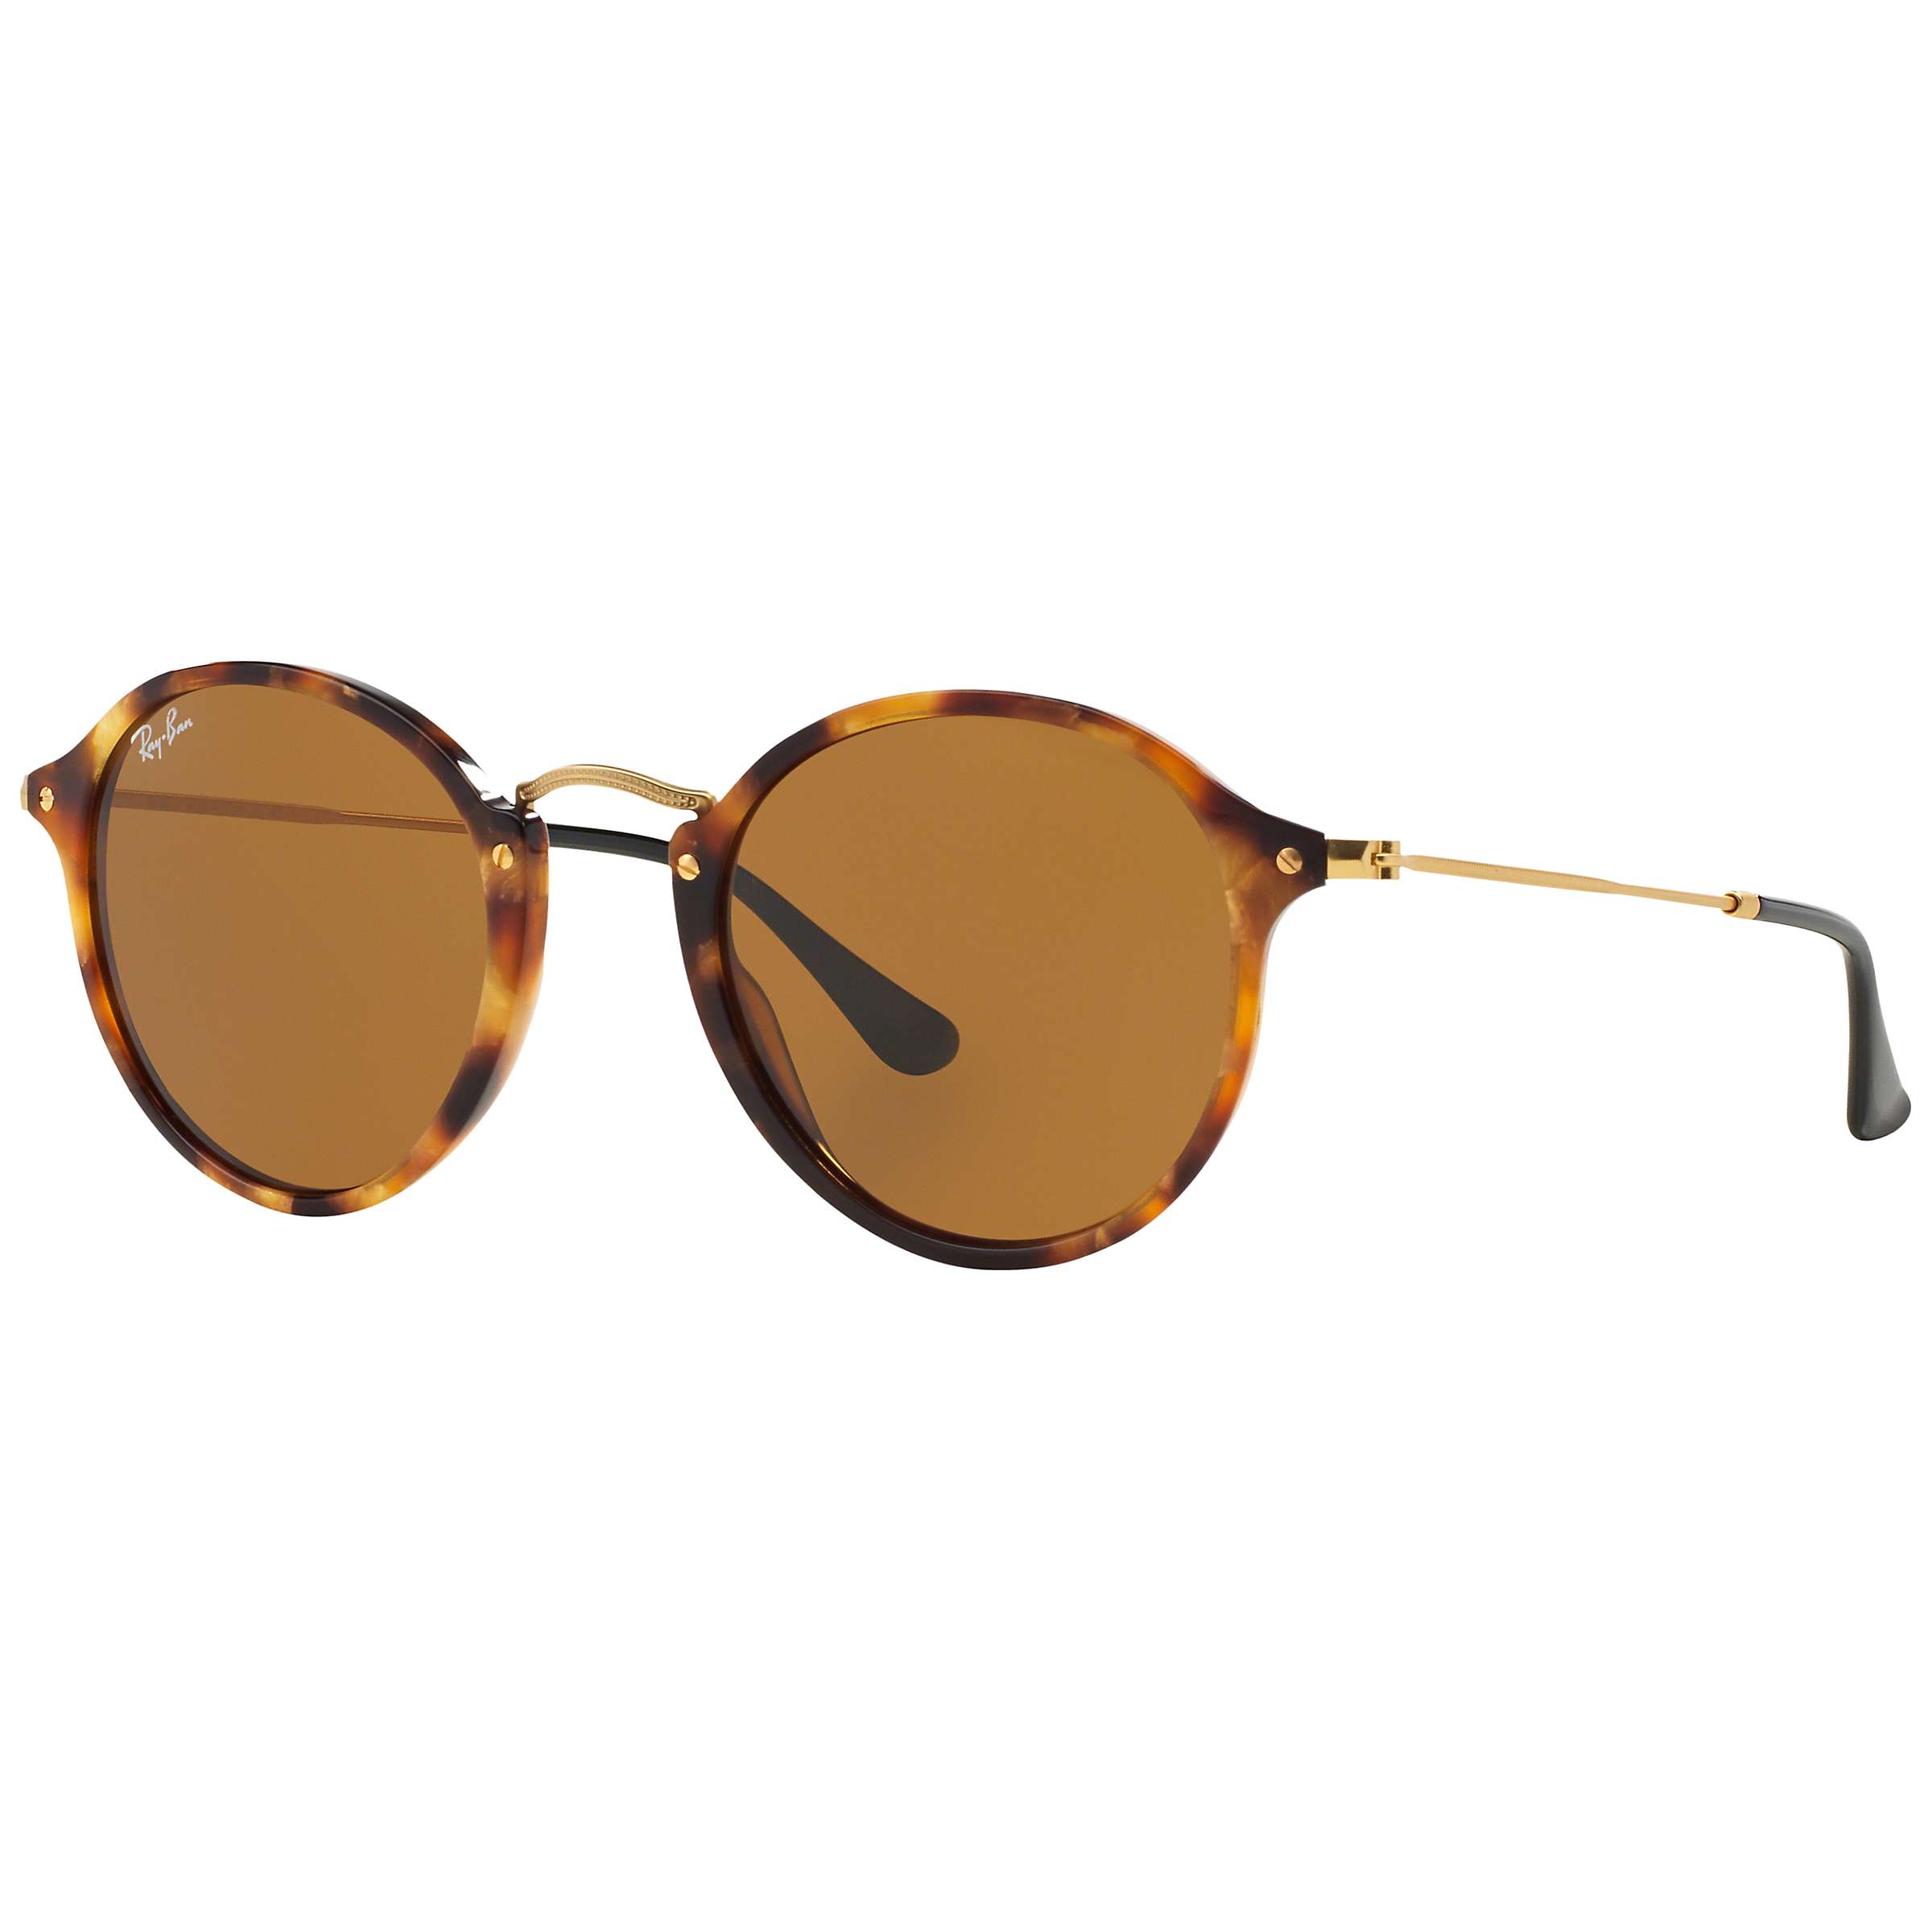 Buy Ray-Ban RB2447 Oval Sunglasses Online at johnlewis.com